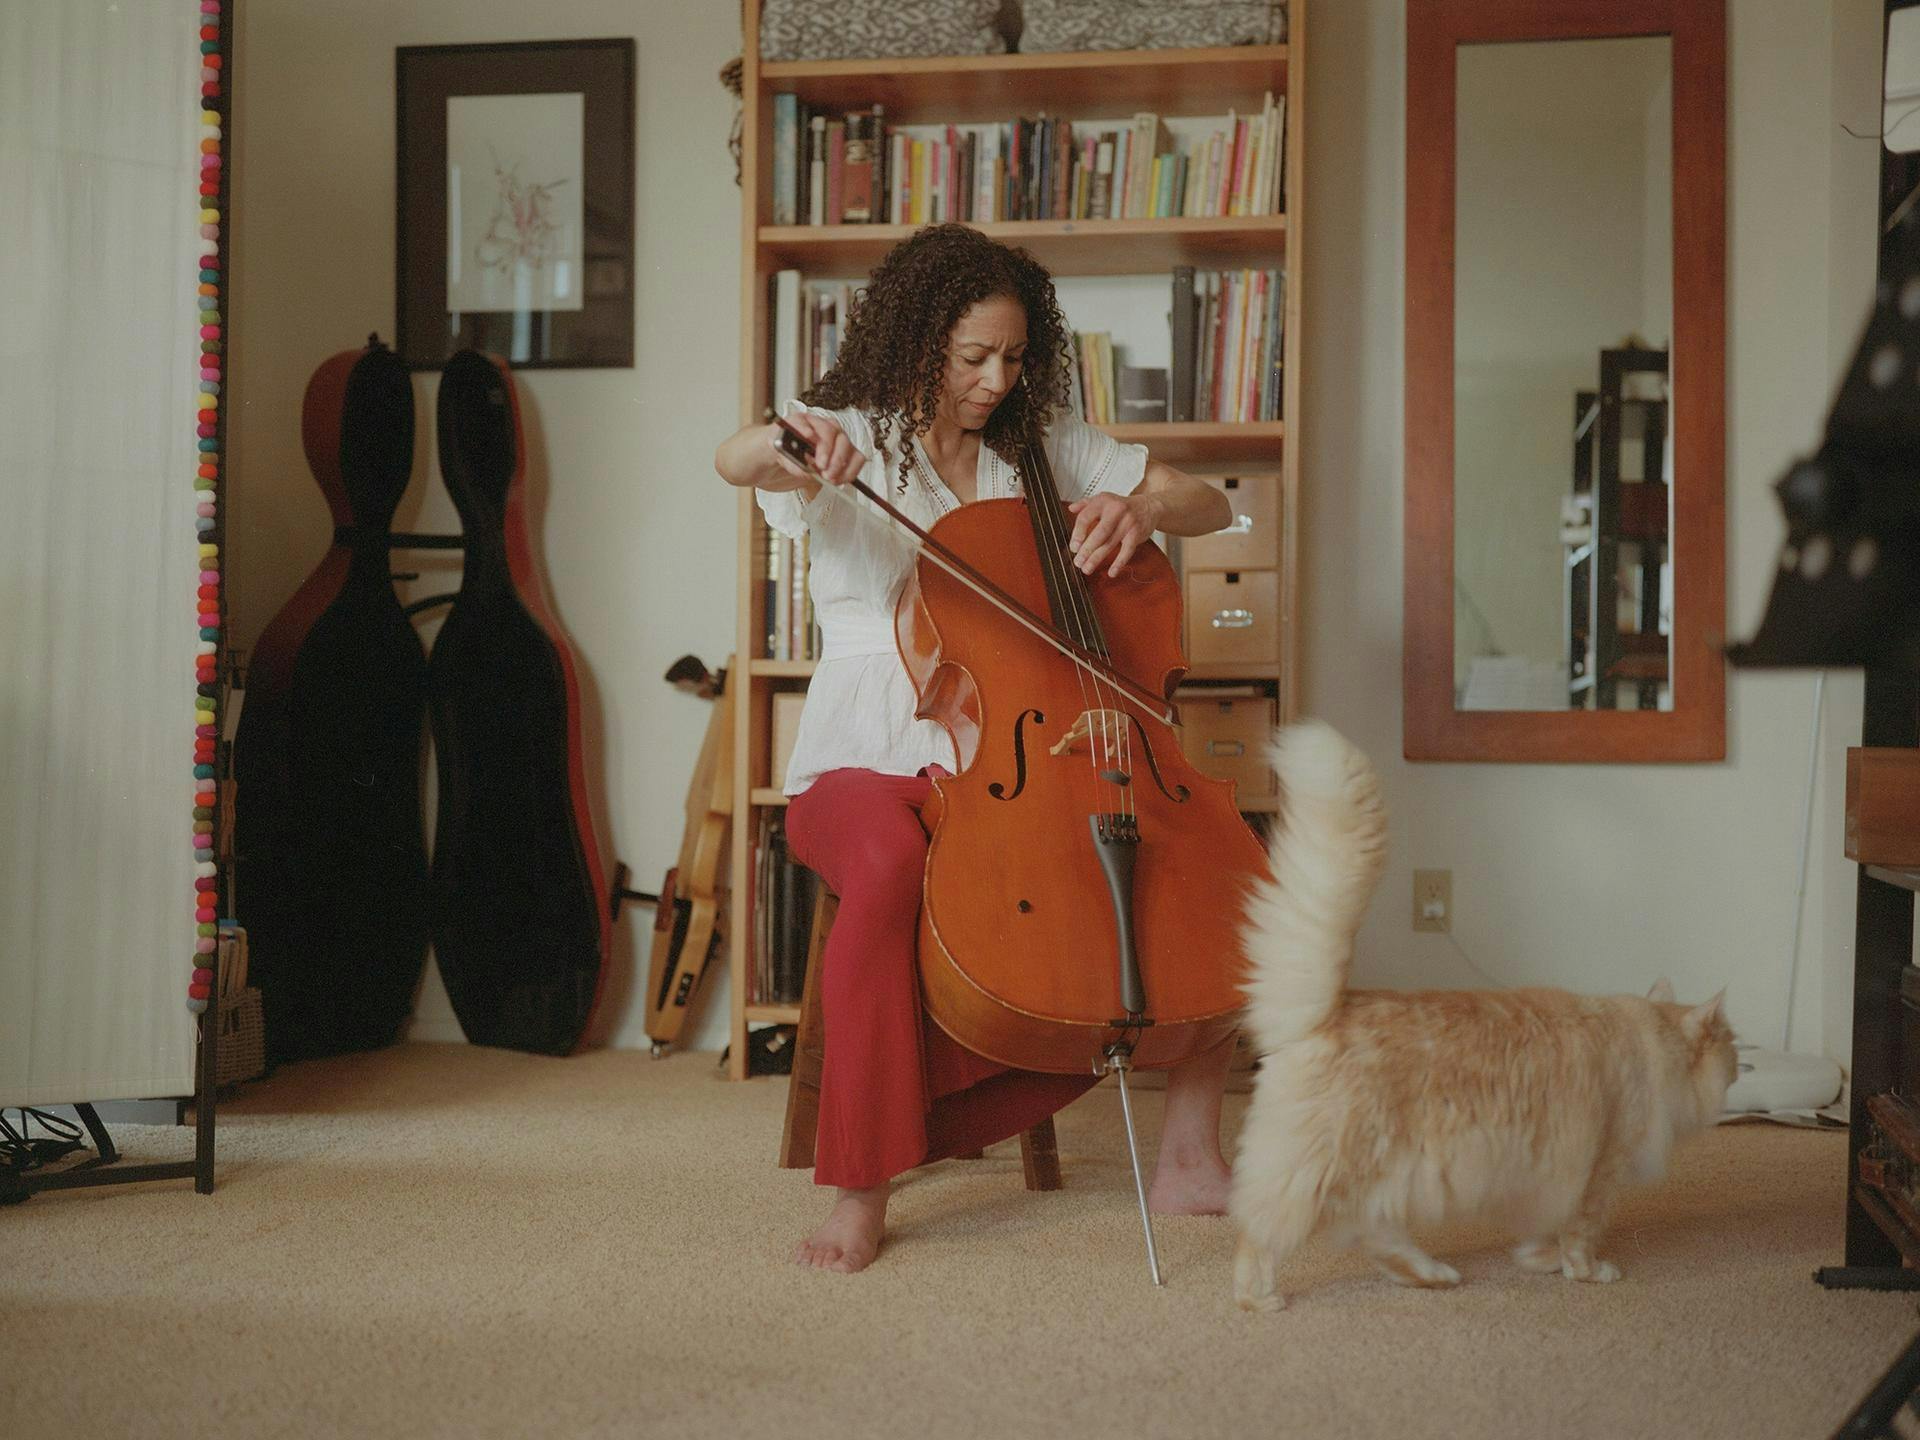 Gretchen Yanover plays her cello at home while a cat walks past her